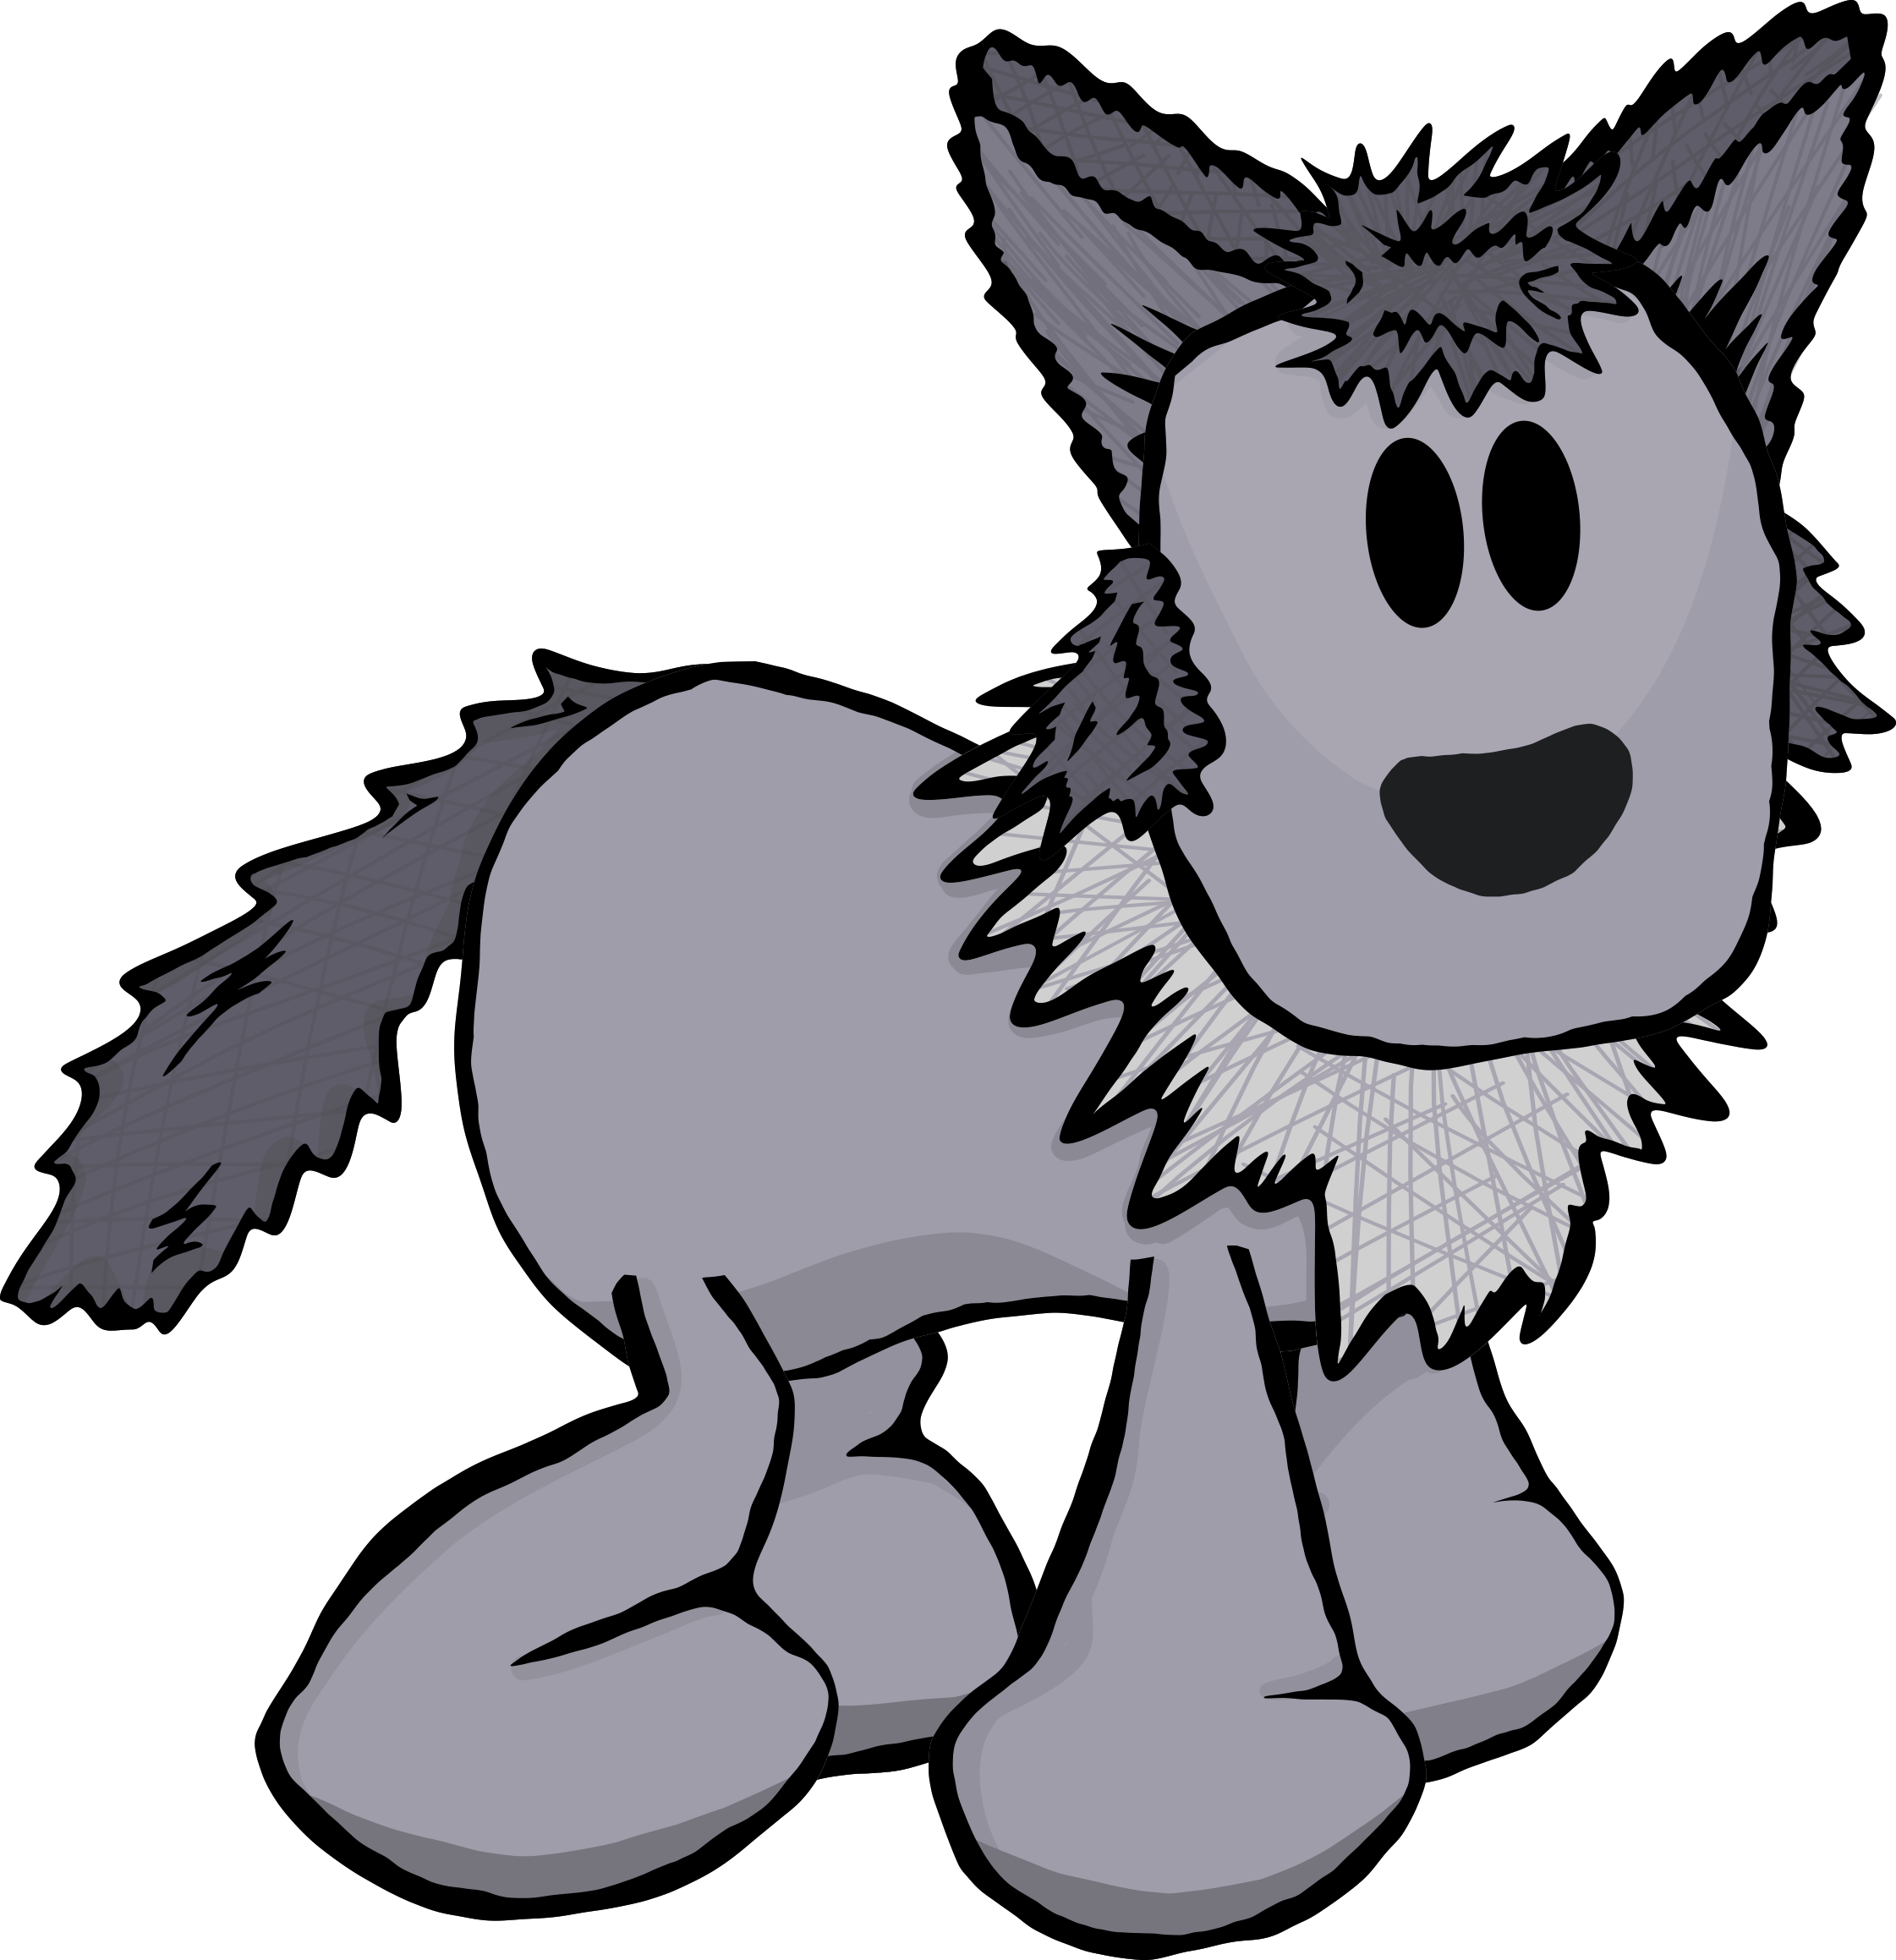 An illustration of the gray wolf puppet. It has a lighter gray fluffy neck. Its tail and ears are a matching darker gray color.